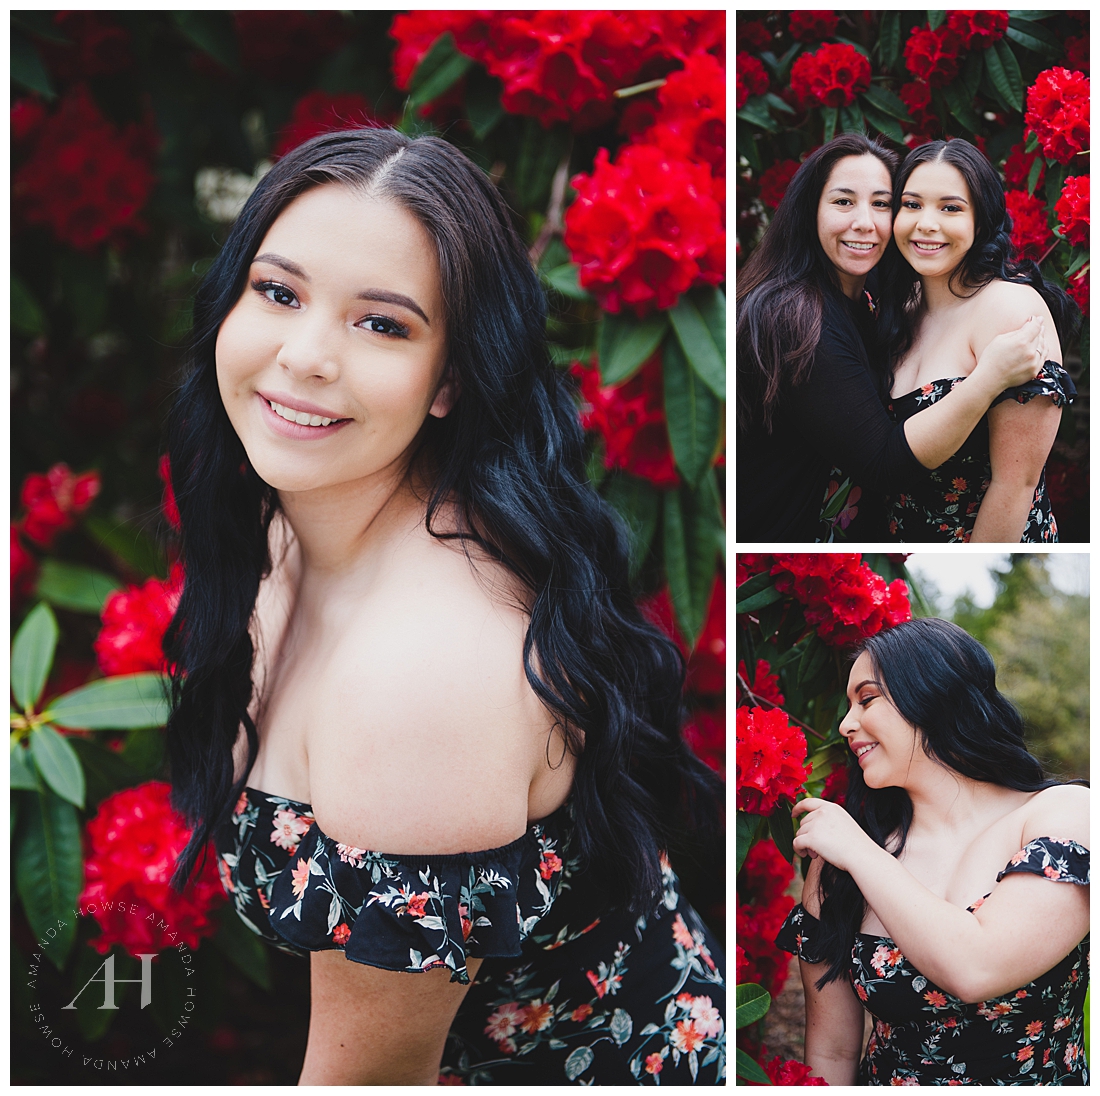 Bold and Colorful Senior Portraits in a Garden | High School Senior Girl with her Mother | Senior Portrait Photographer Amanda Howse